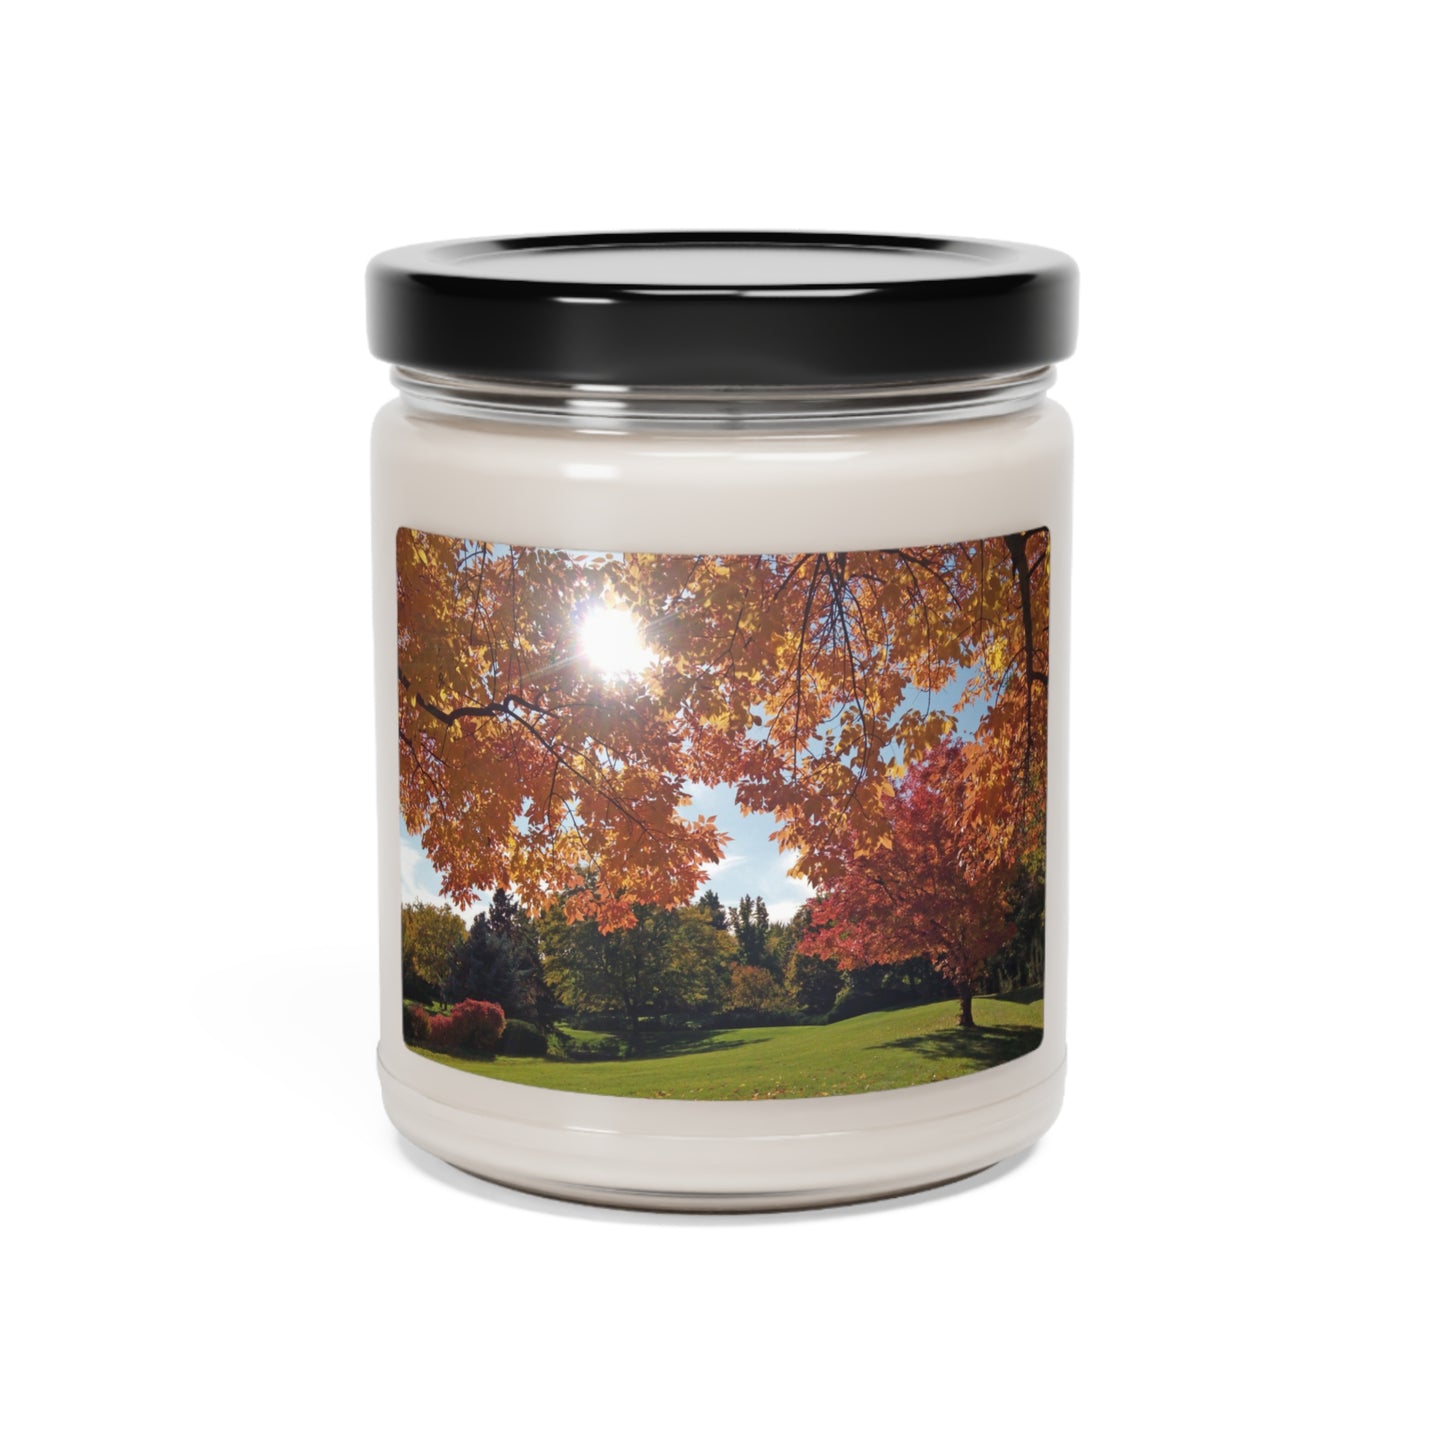 Autumn Light Scented Soy Candle, 9oz